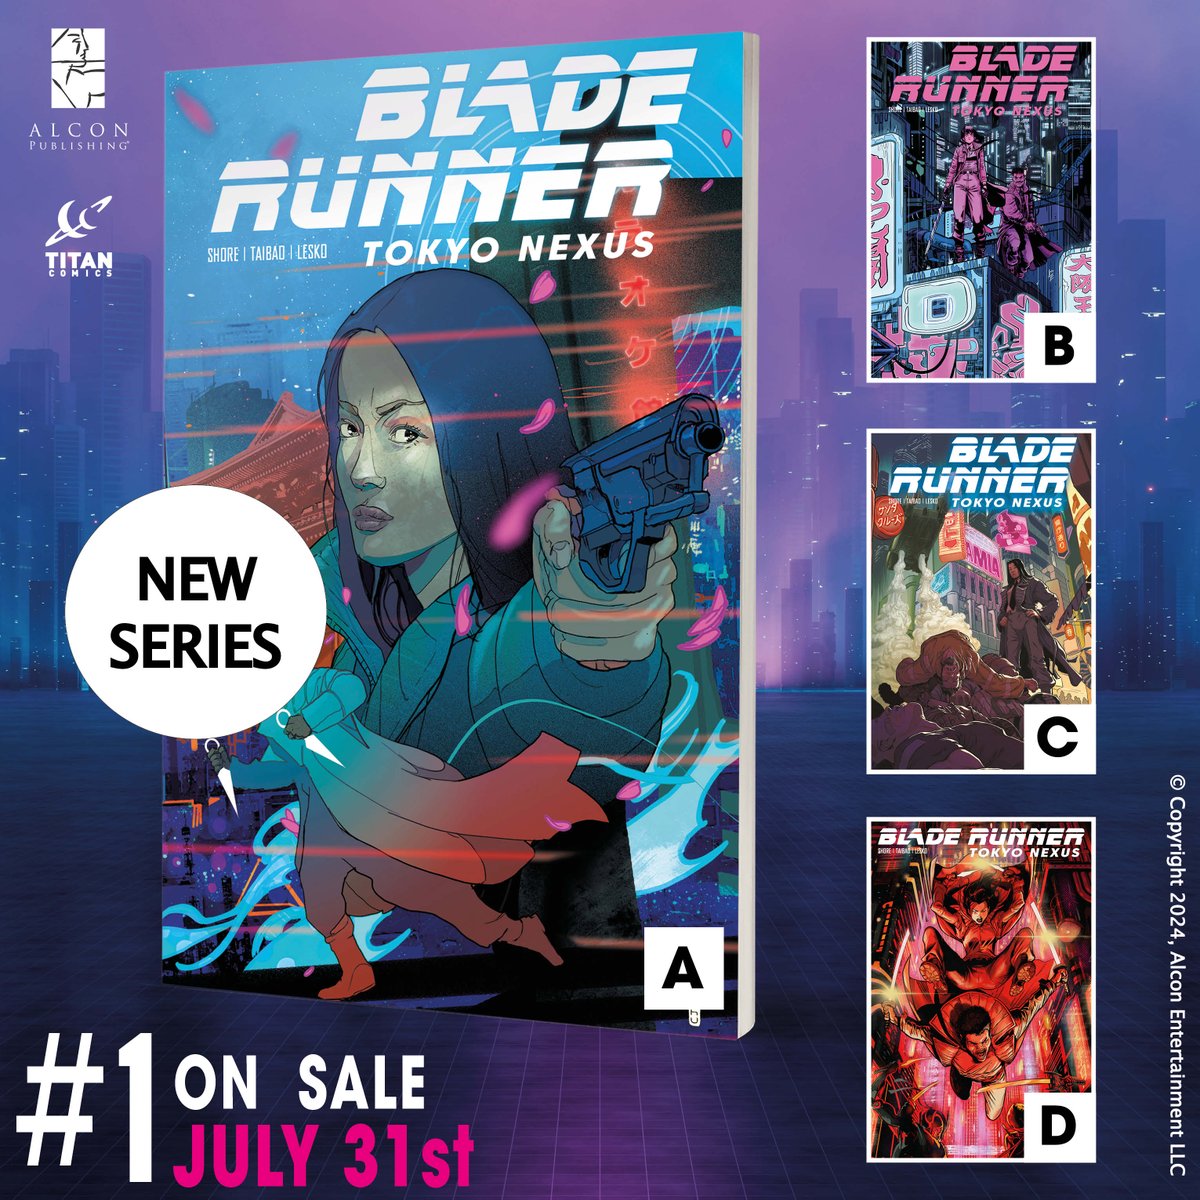 On sale July 31st is the 1st issue of the BRAND NEW #bladerunner comic series, BLADE RUNNER TOKYO NEXUS, from Kianna Shore (W) and Rodolfo Taibo (A). Want to find out how to pre-order the next installment in the Blade Runner comics universe? Look here: t.ly/z8_NT